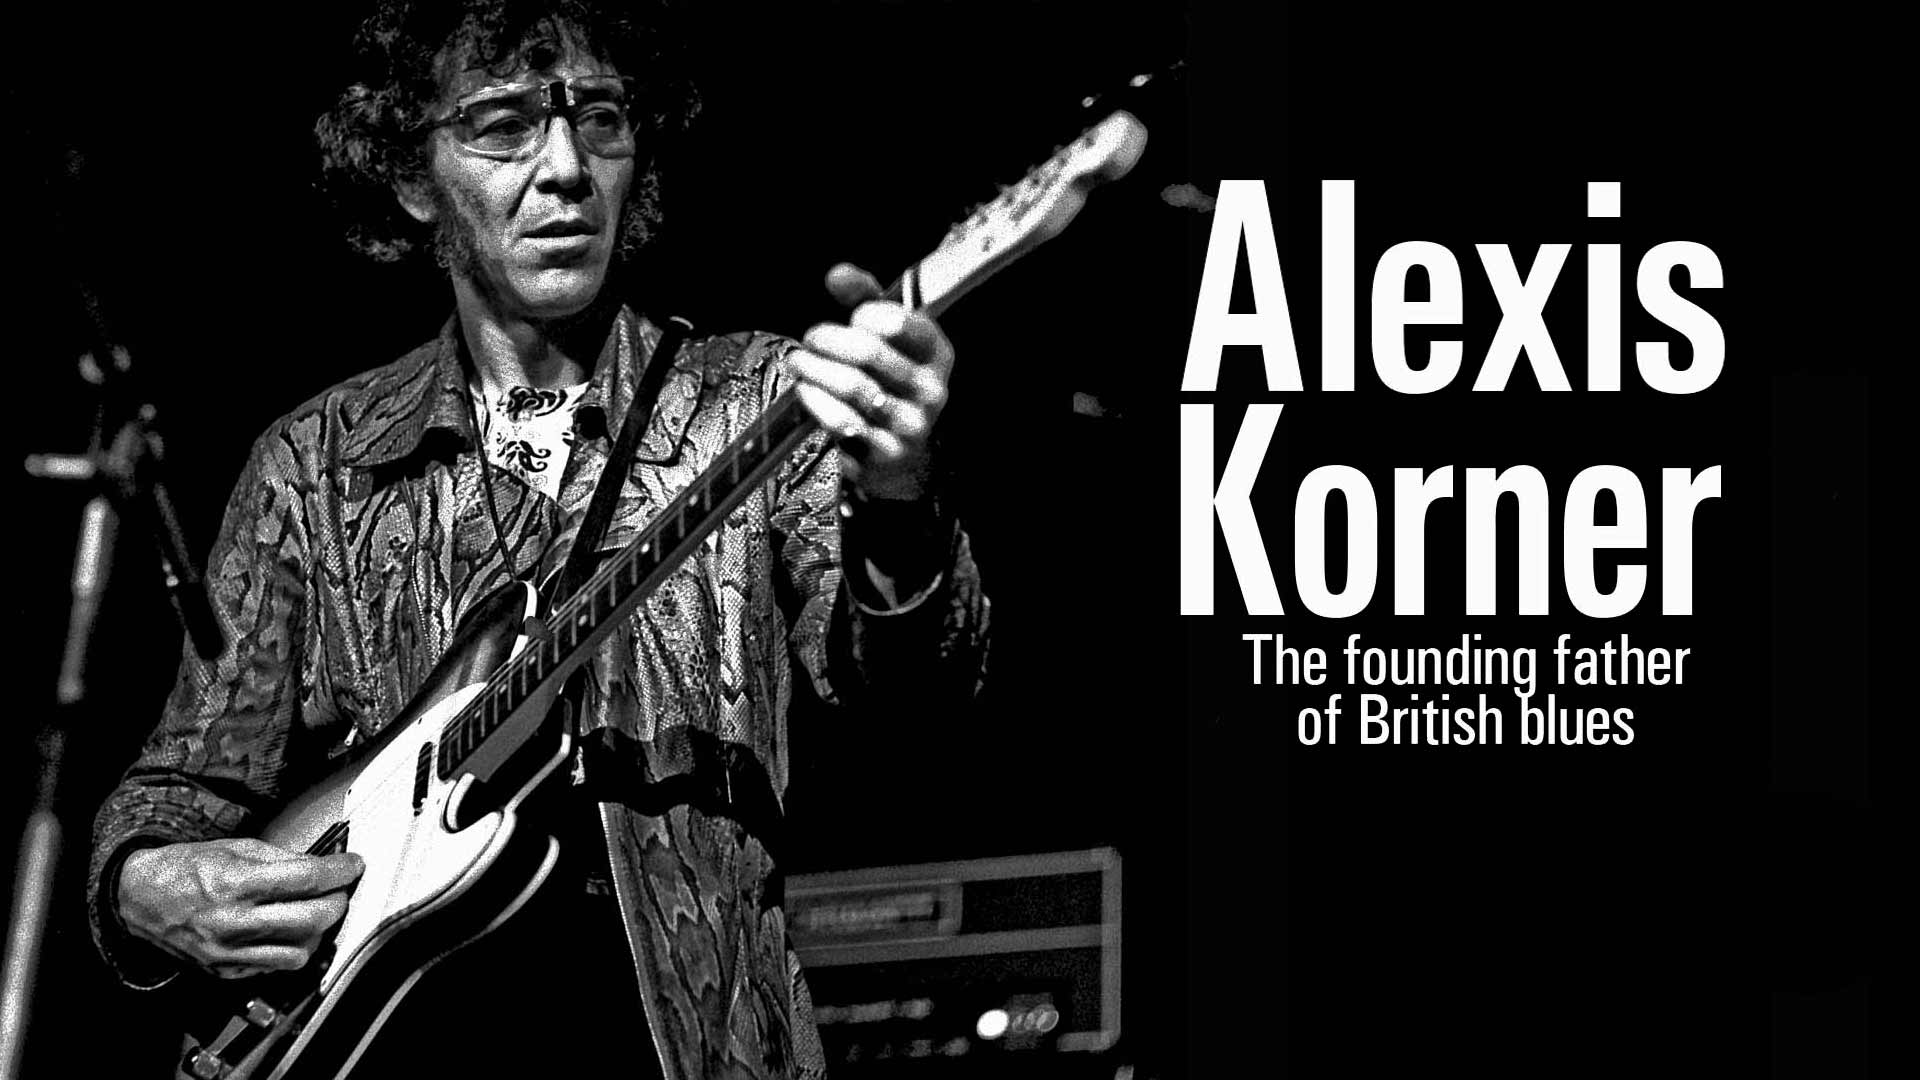 Alexis Korner, the founding father of British Blues